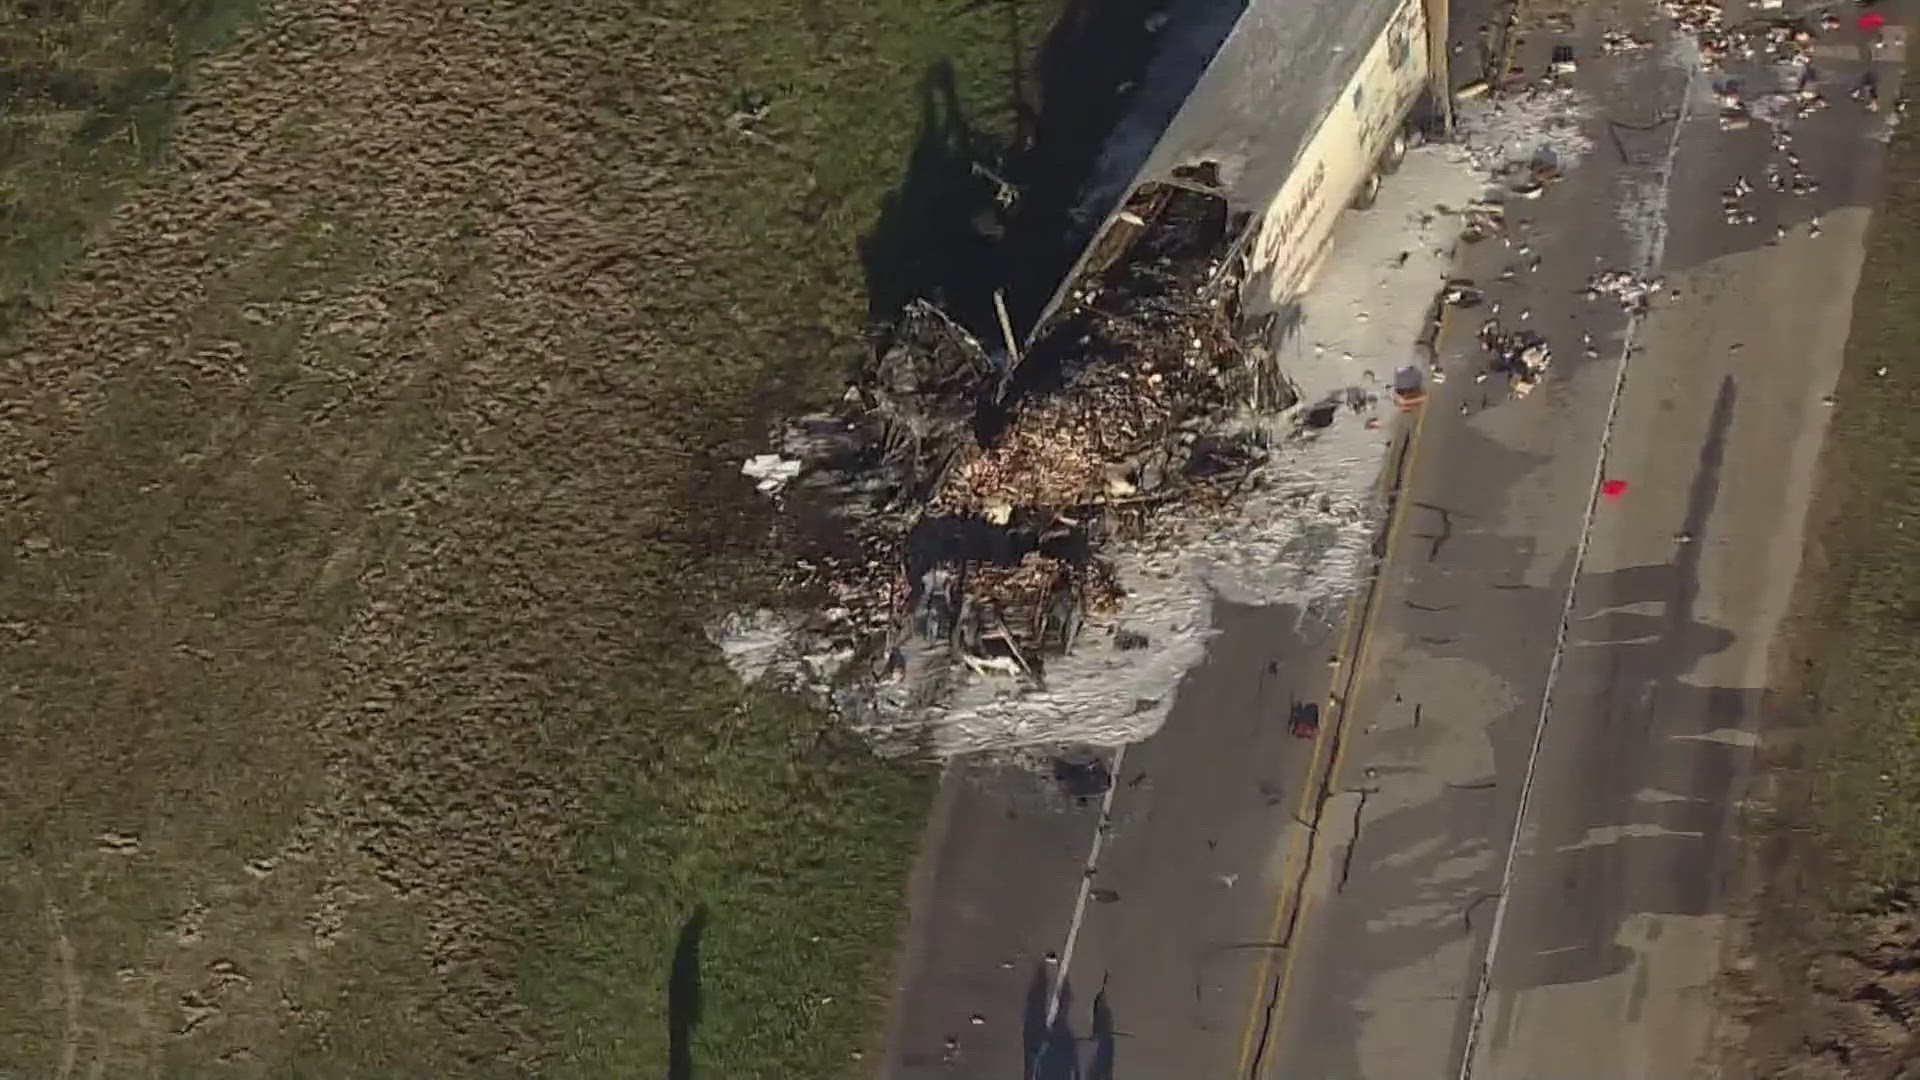 Aerial views from Air 11 show the cab of the truck and the front end of the trailer destroyed by fire.